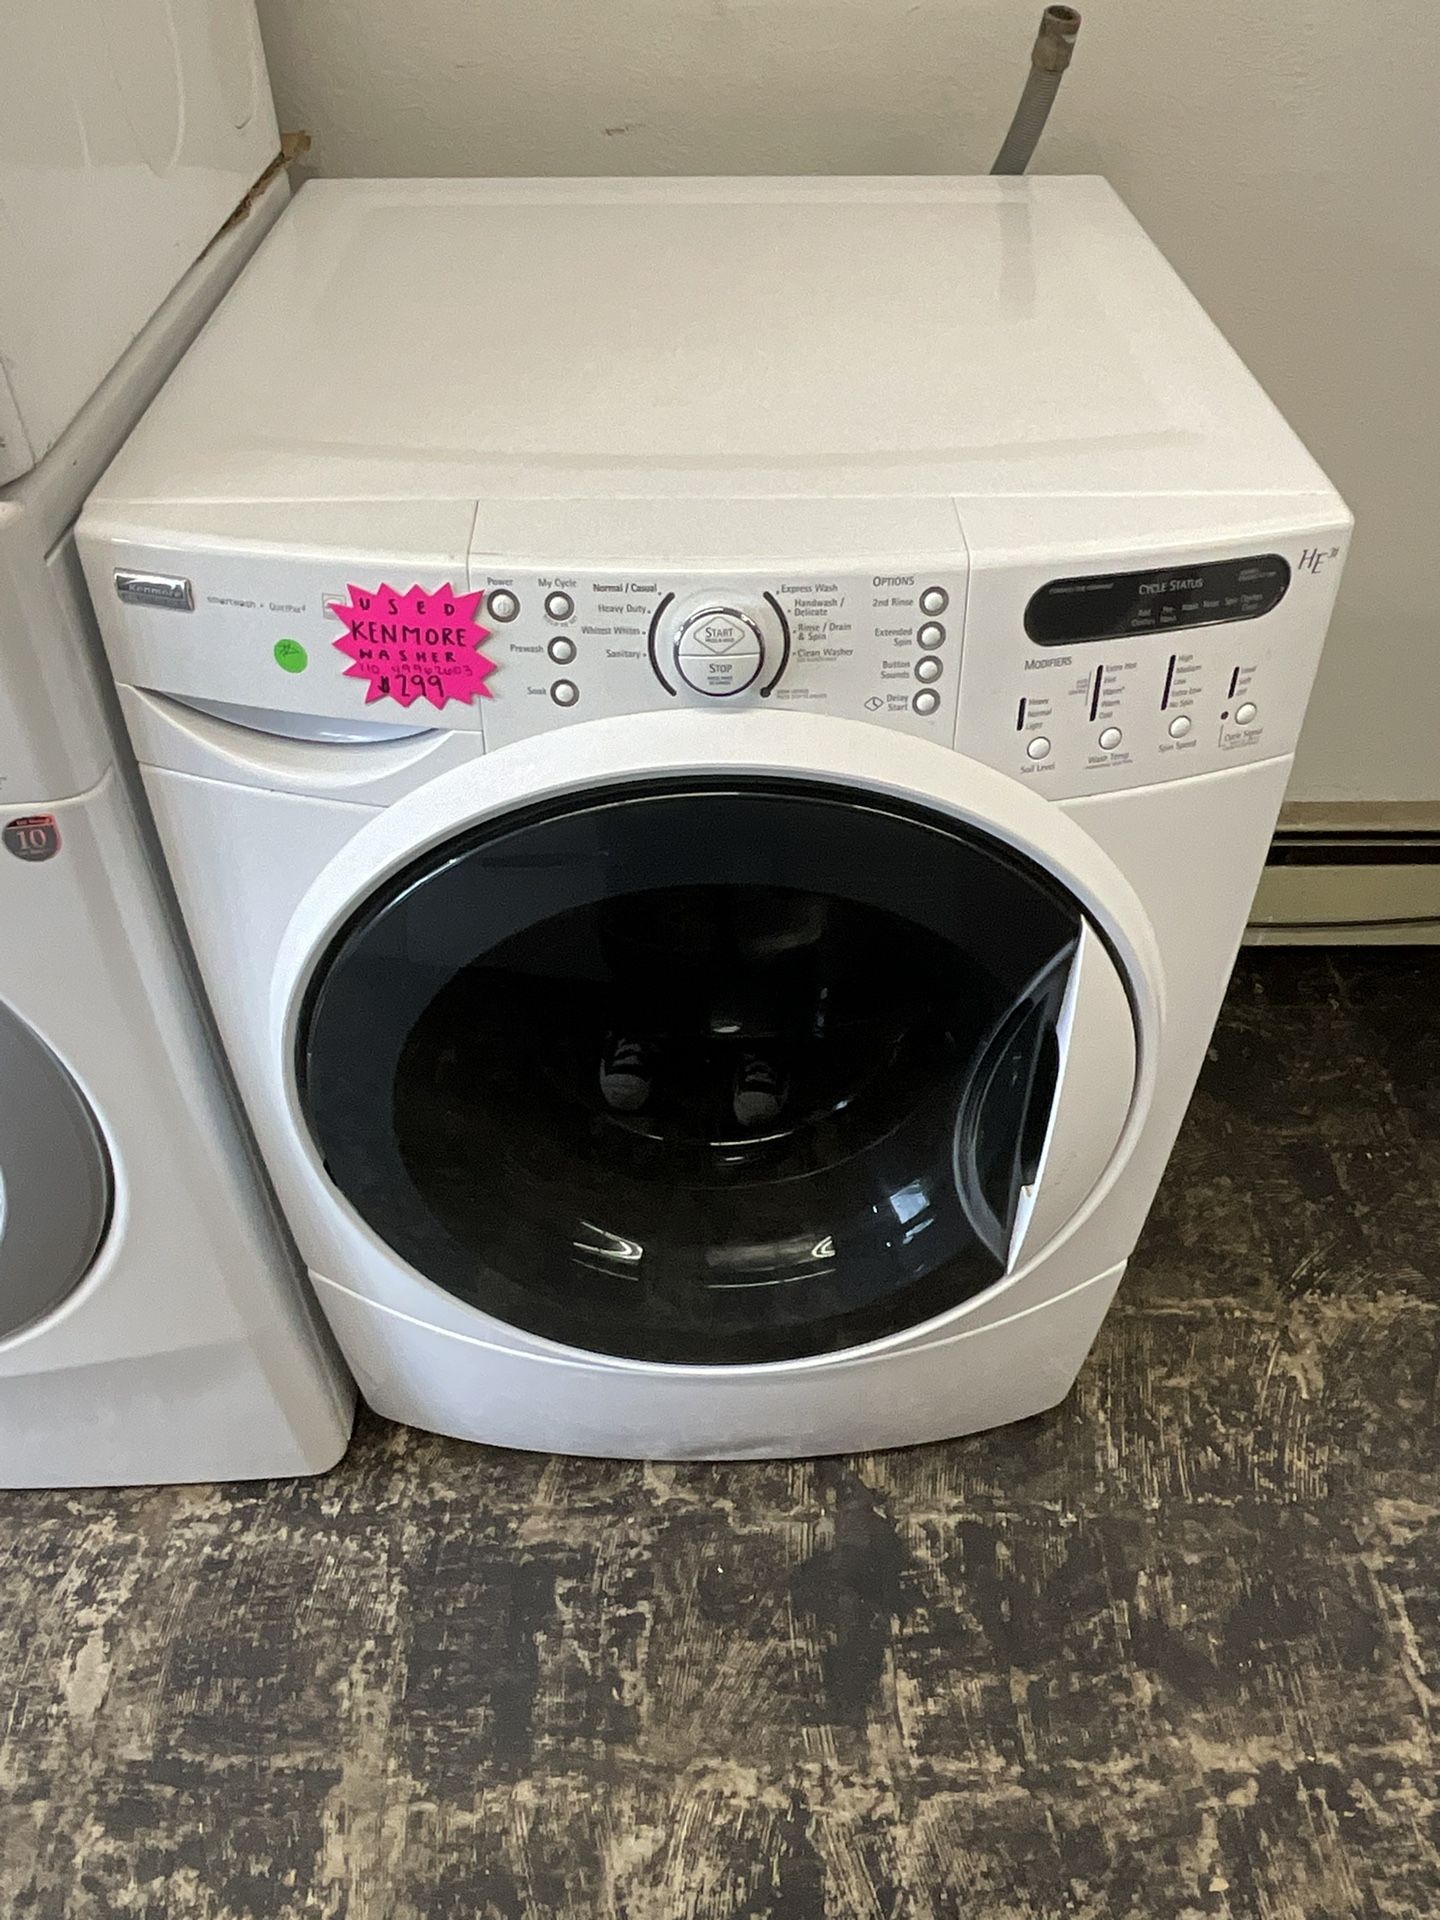 USED KENMORE WASHER